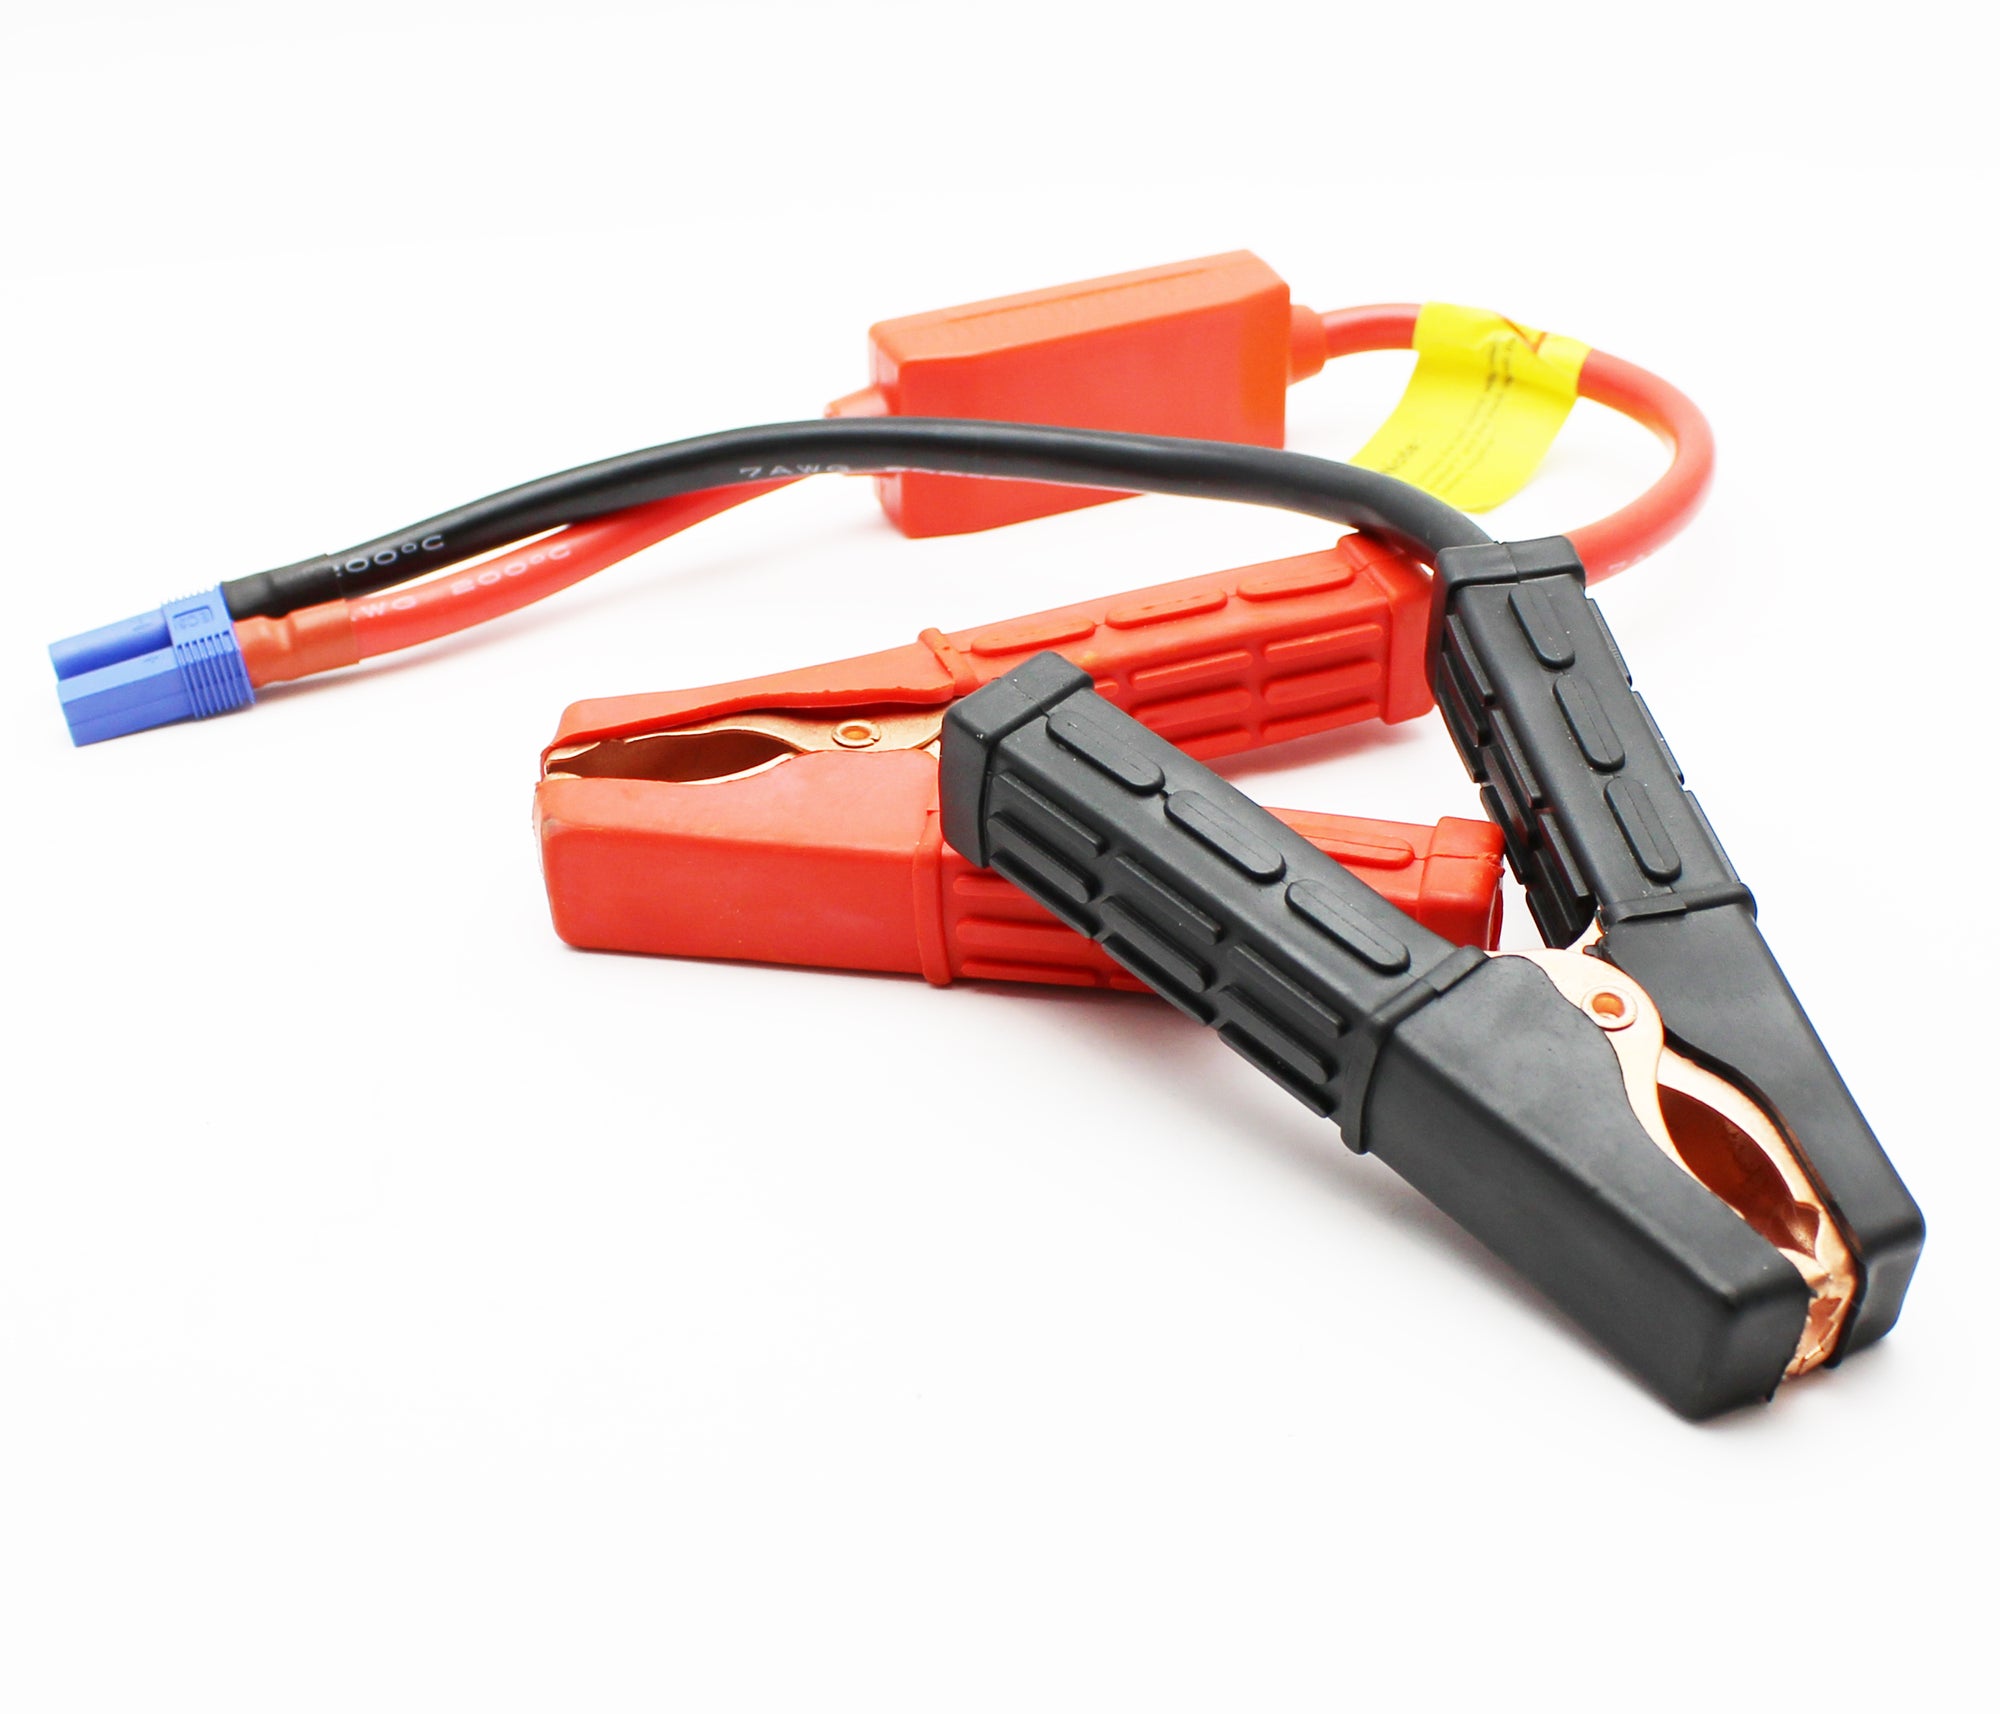 POD Jumper Cables  |  Select from Premium-Pro, Intelligent & Standard Features